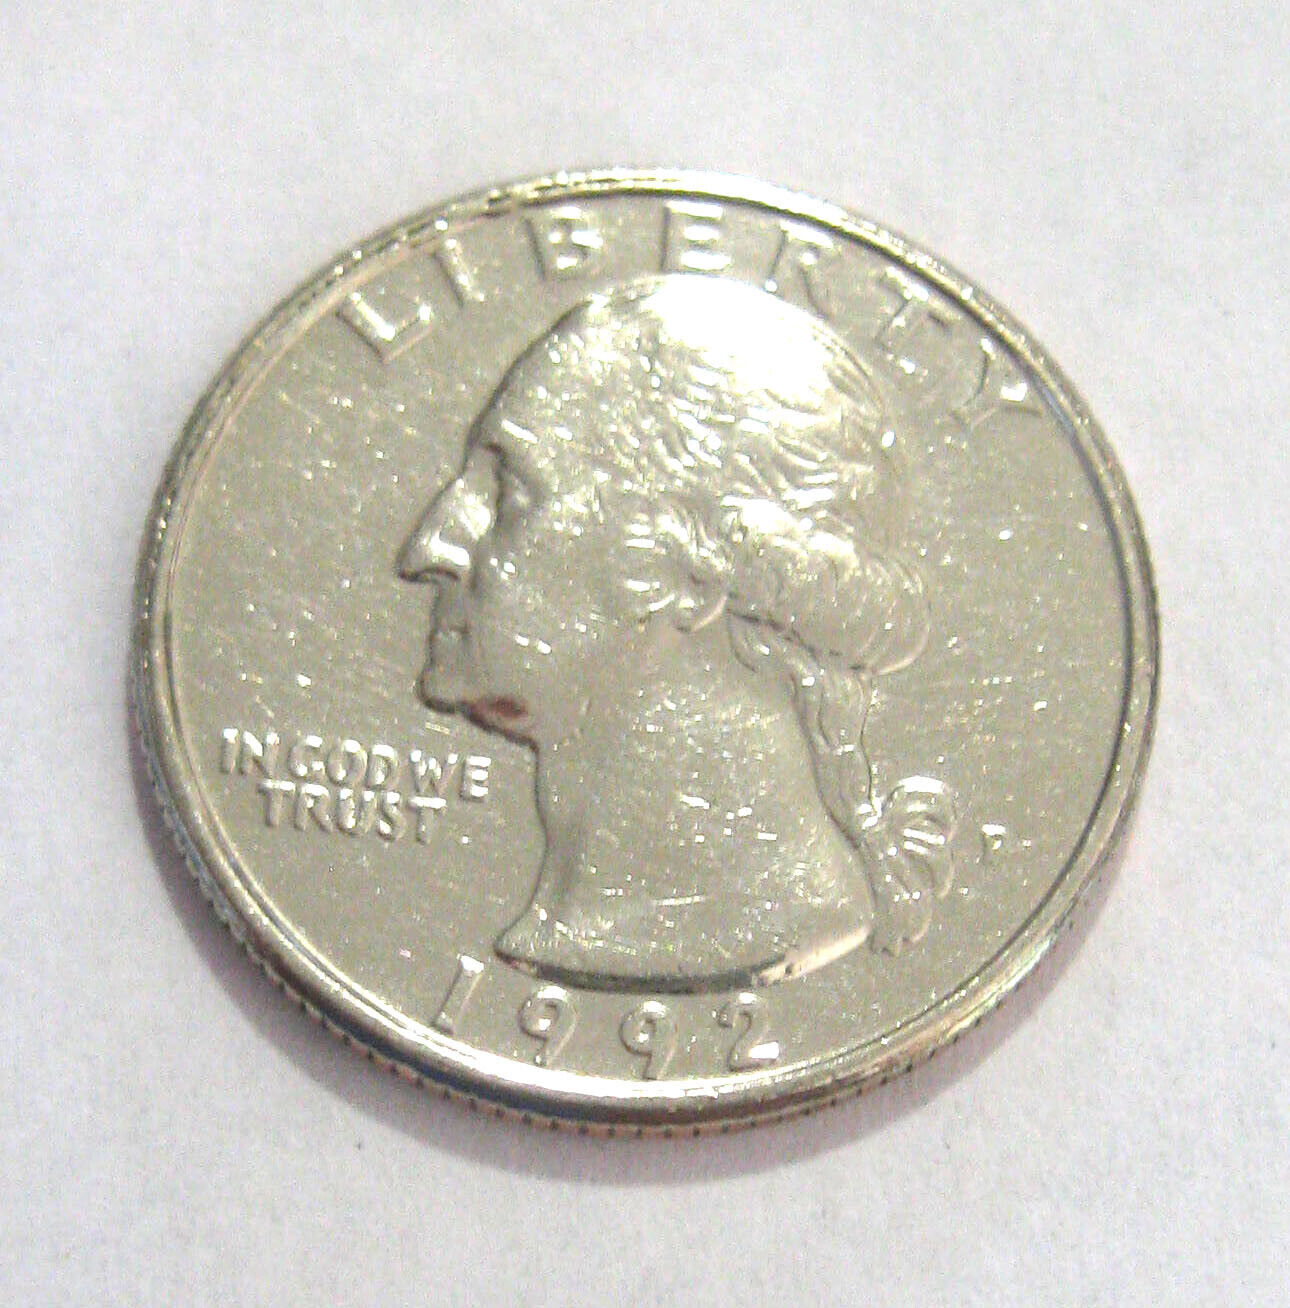 New Shim Shell Steel Trick US Quarter Coin Works Great with a Magnet